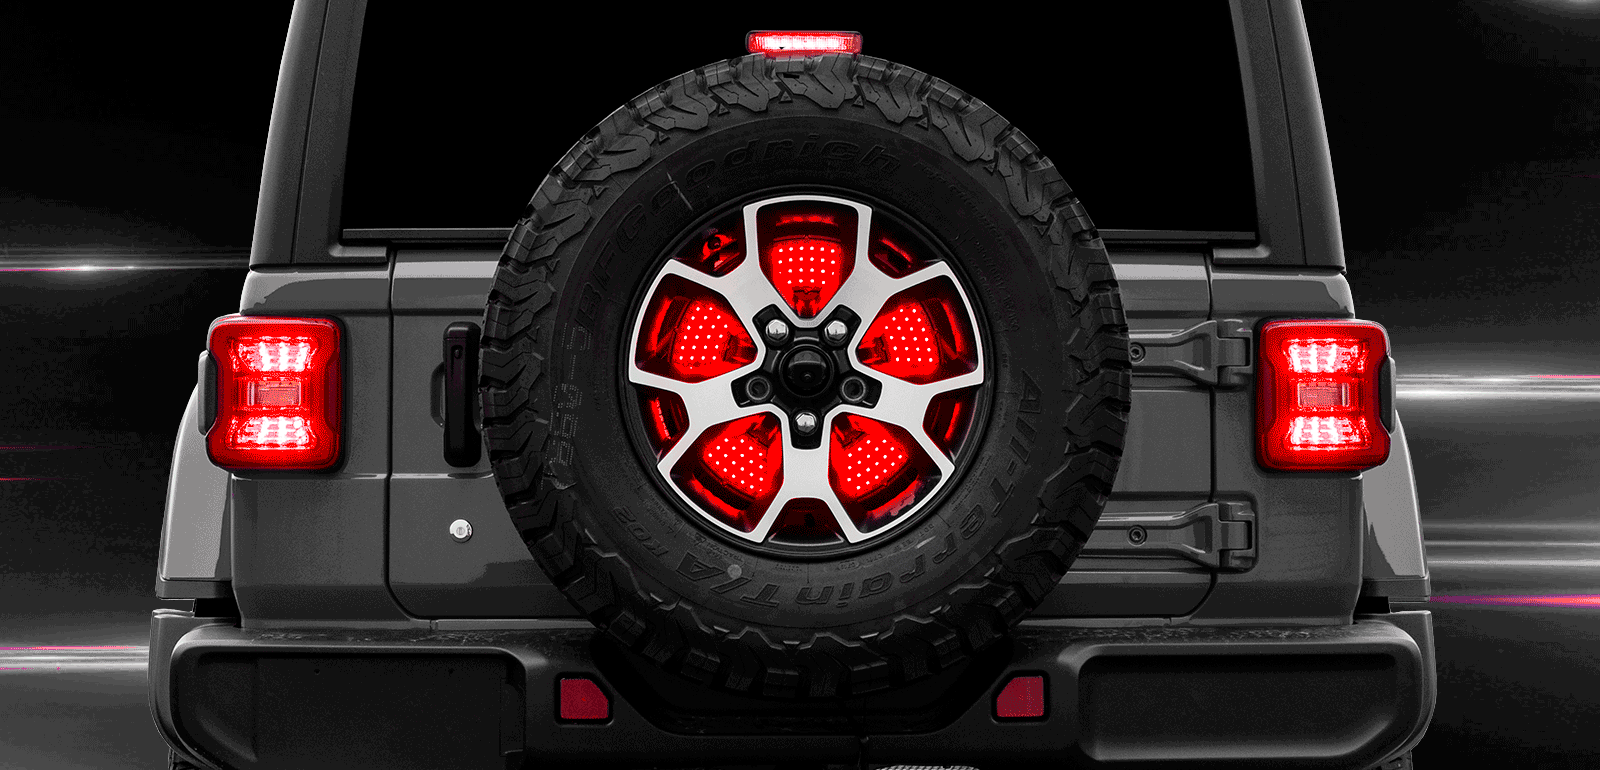 5th Backup Wheel Light from XKGLOW for Ford Bronco + Jeep Wrangler JL JK TJ